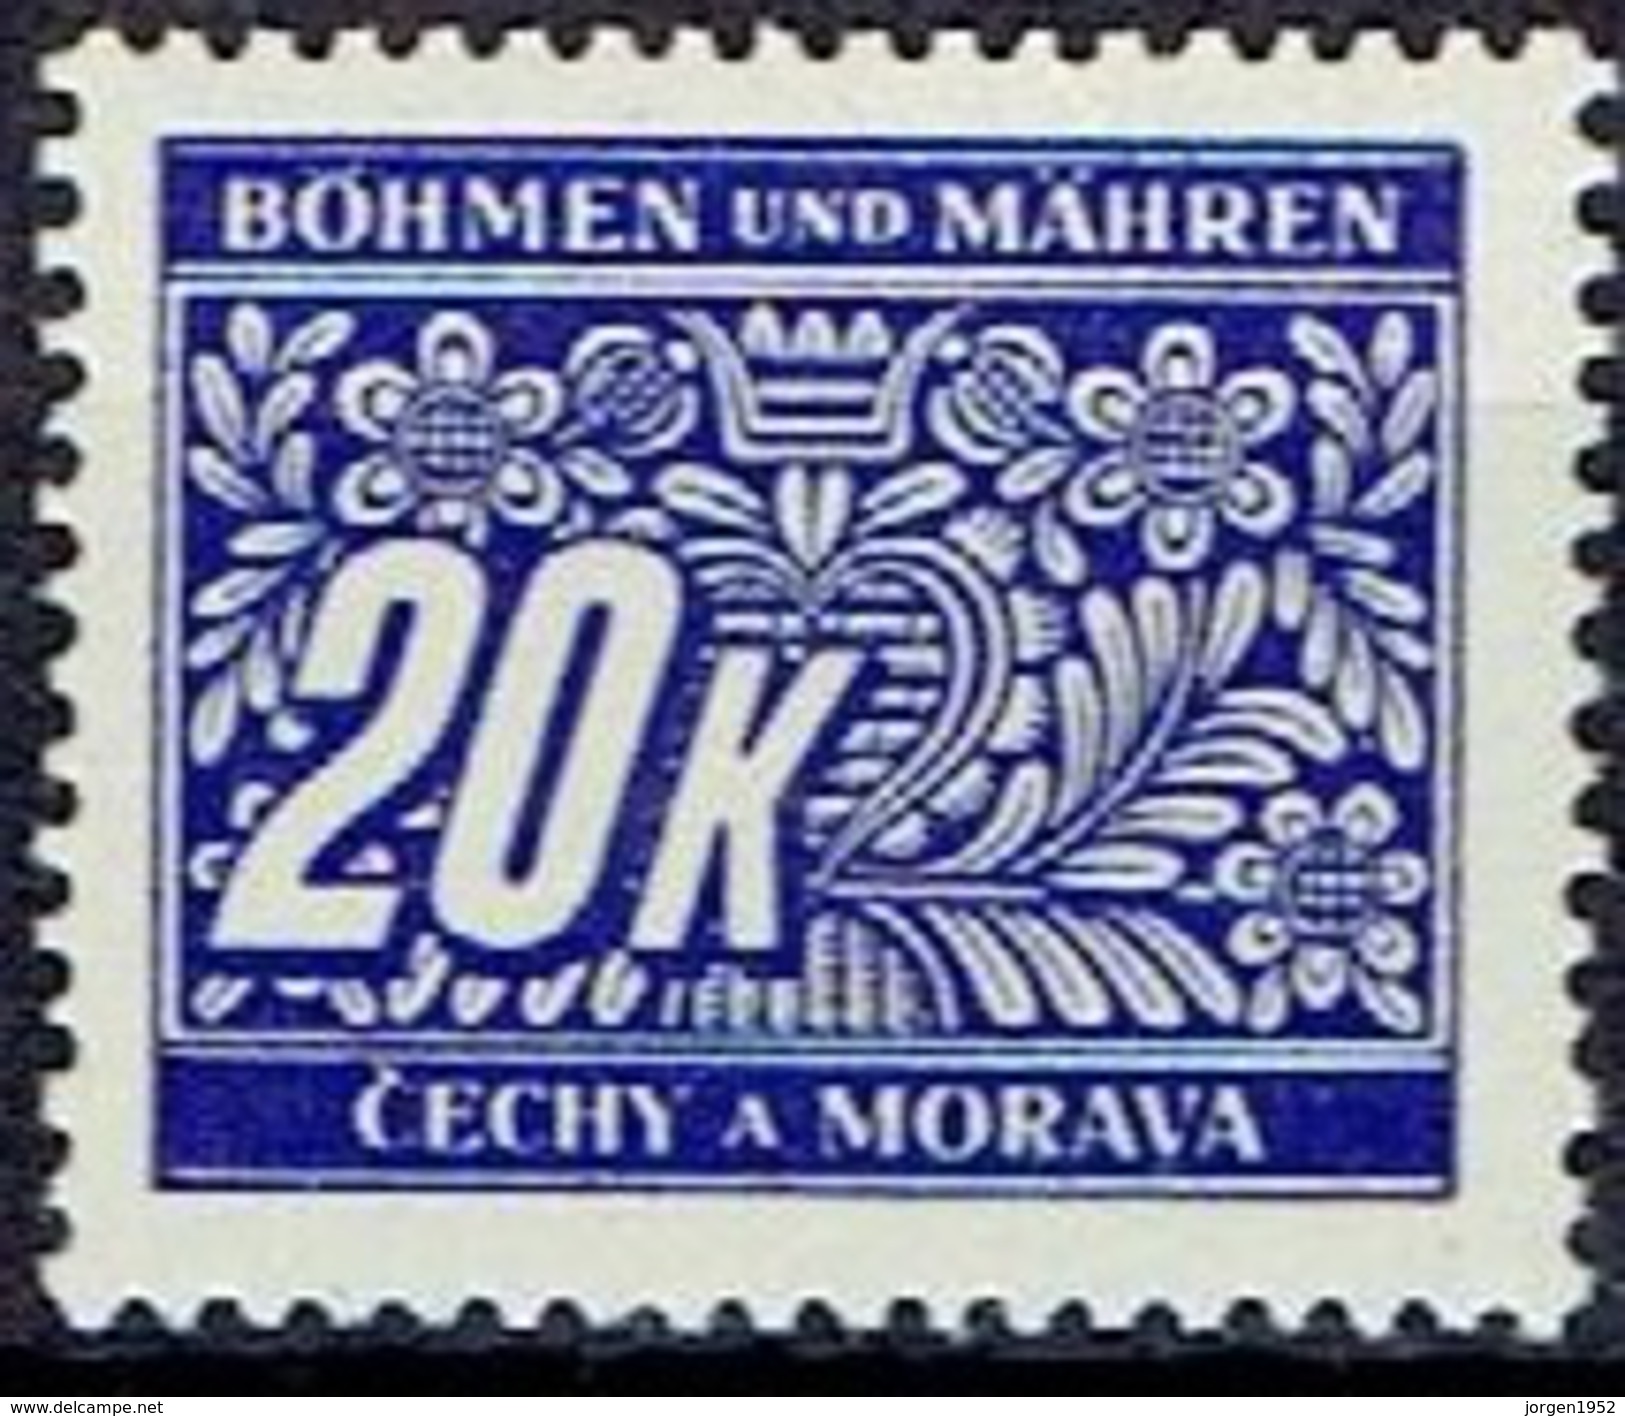 BOHEMIA & MORAVIA # POSTAGE DUE  FROM 1939-40 ** - Unused Stamps